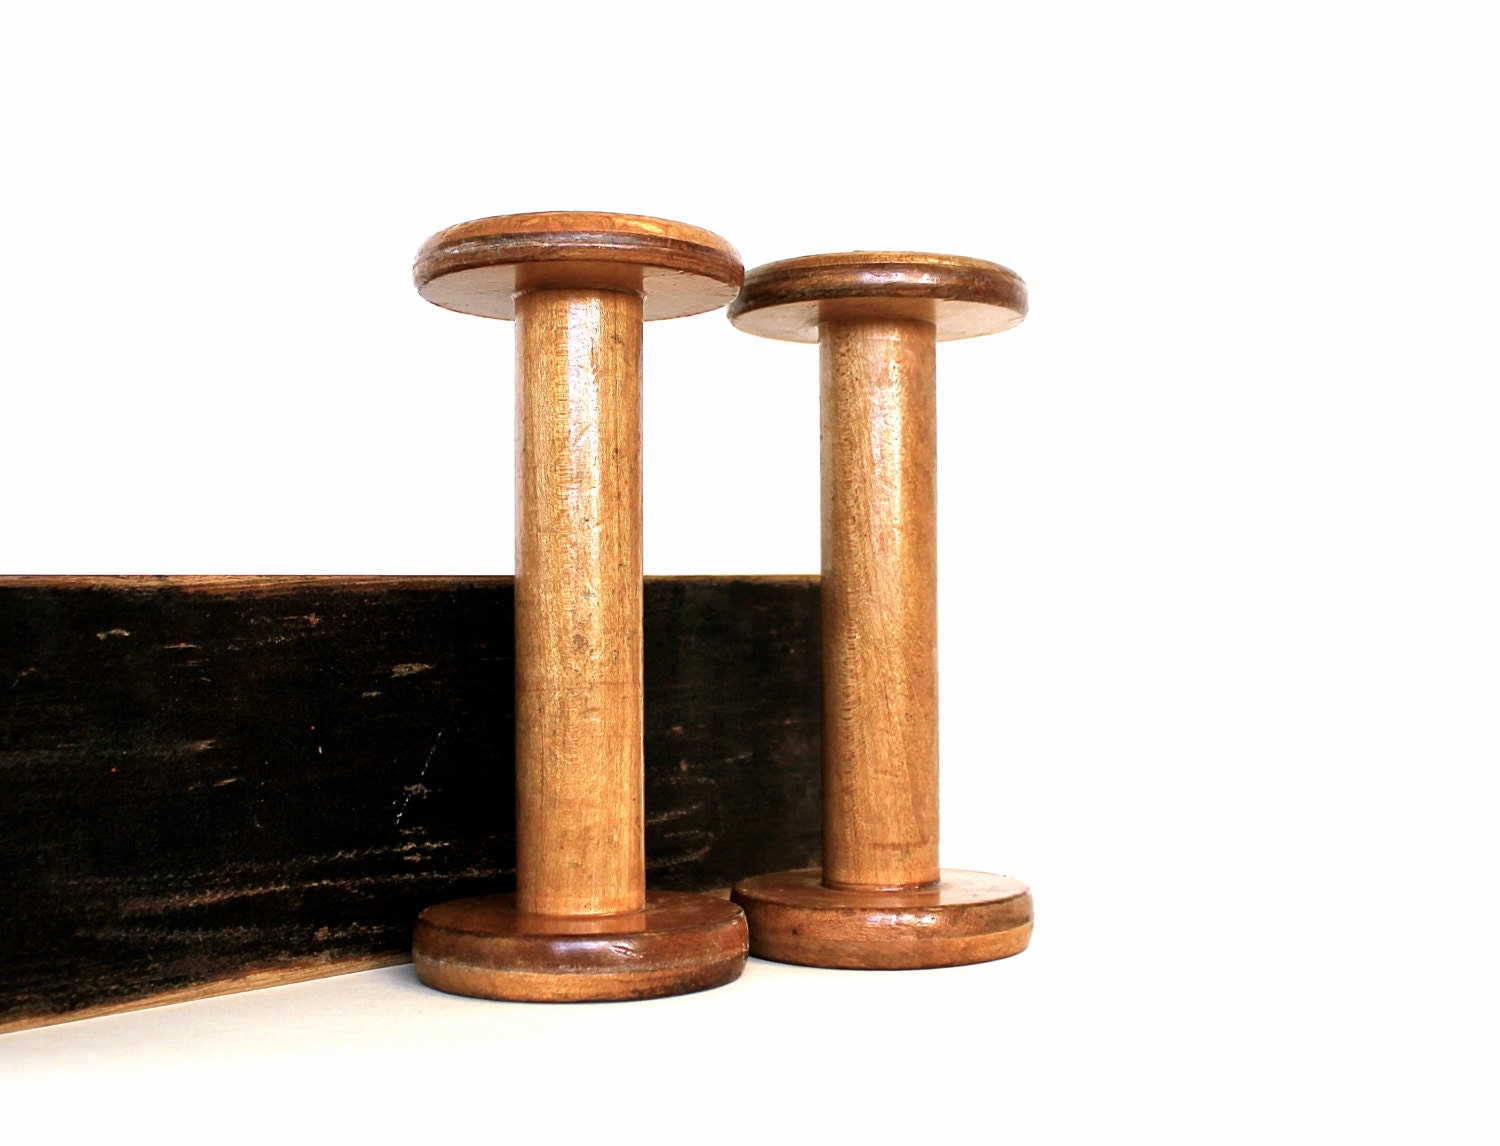 Spooled - Vintage Wooden Industrial Spools - Wood - Geometric - Home Decor - Supplies - Rustic - Sewing - becaruns